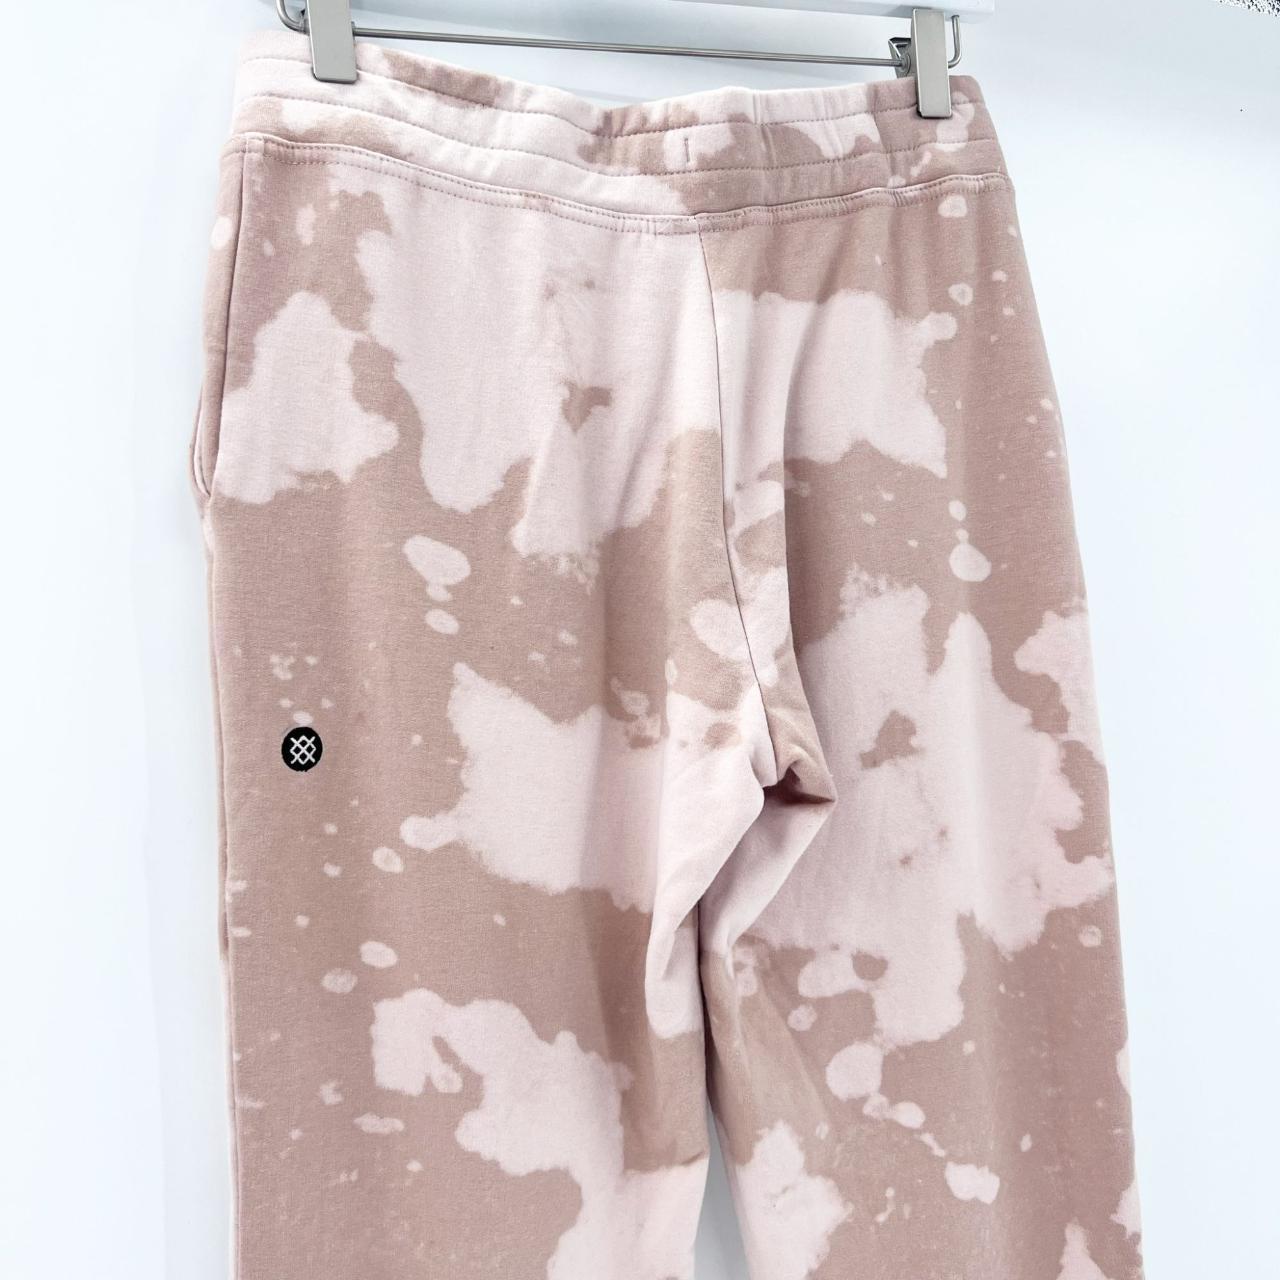 Product Image 4 - Stance Women's Pink Tan Cow